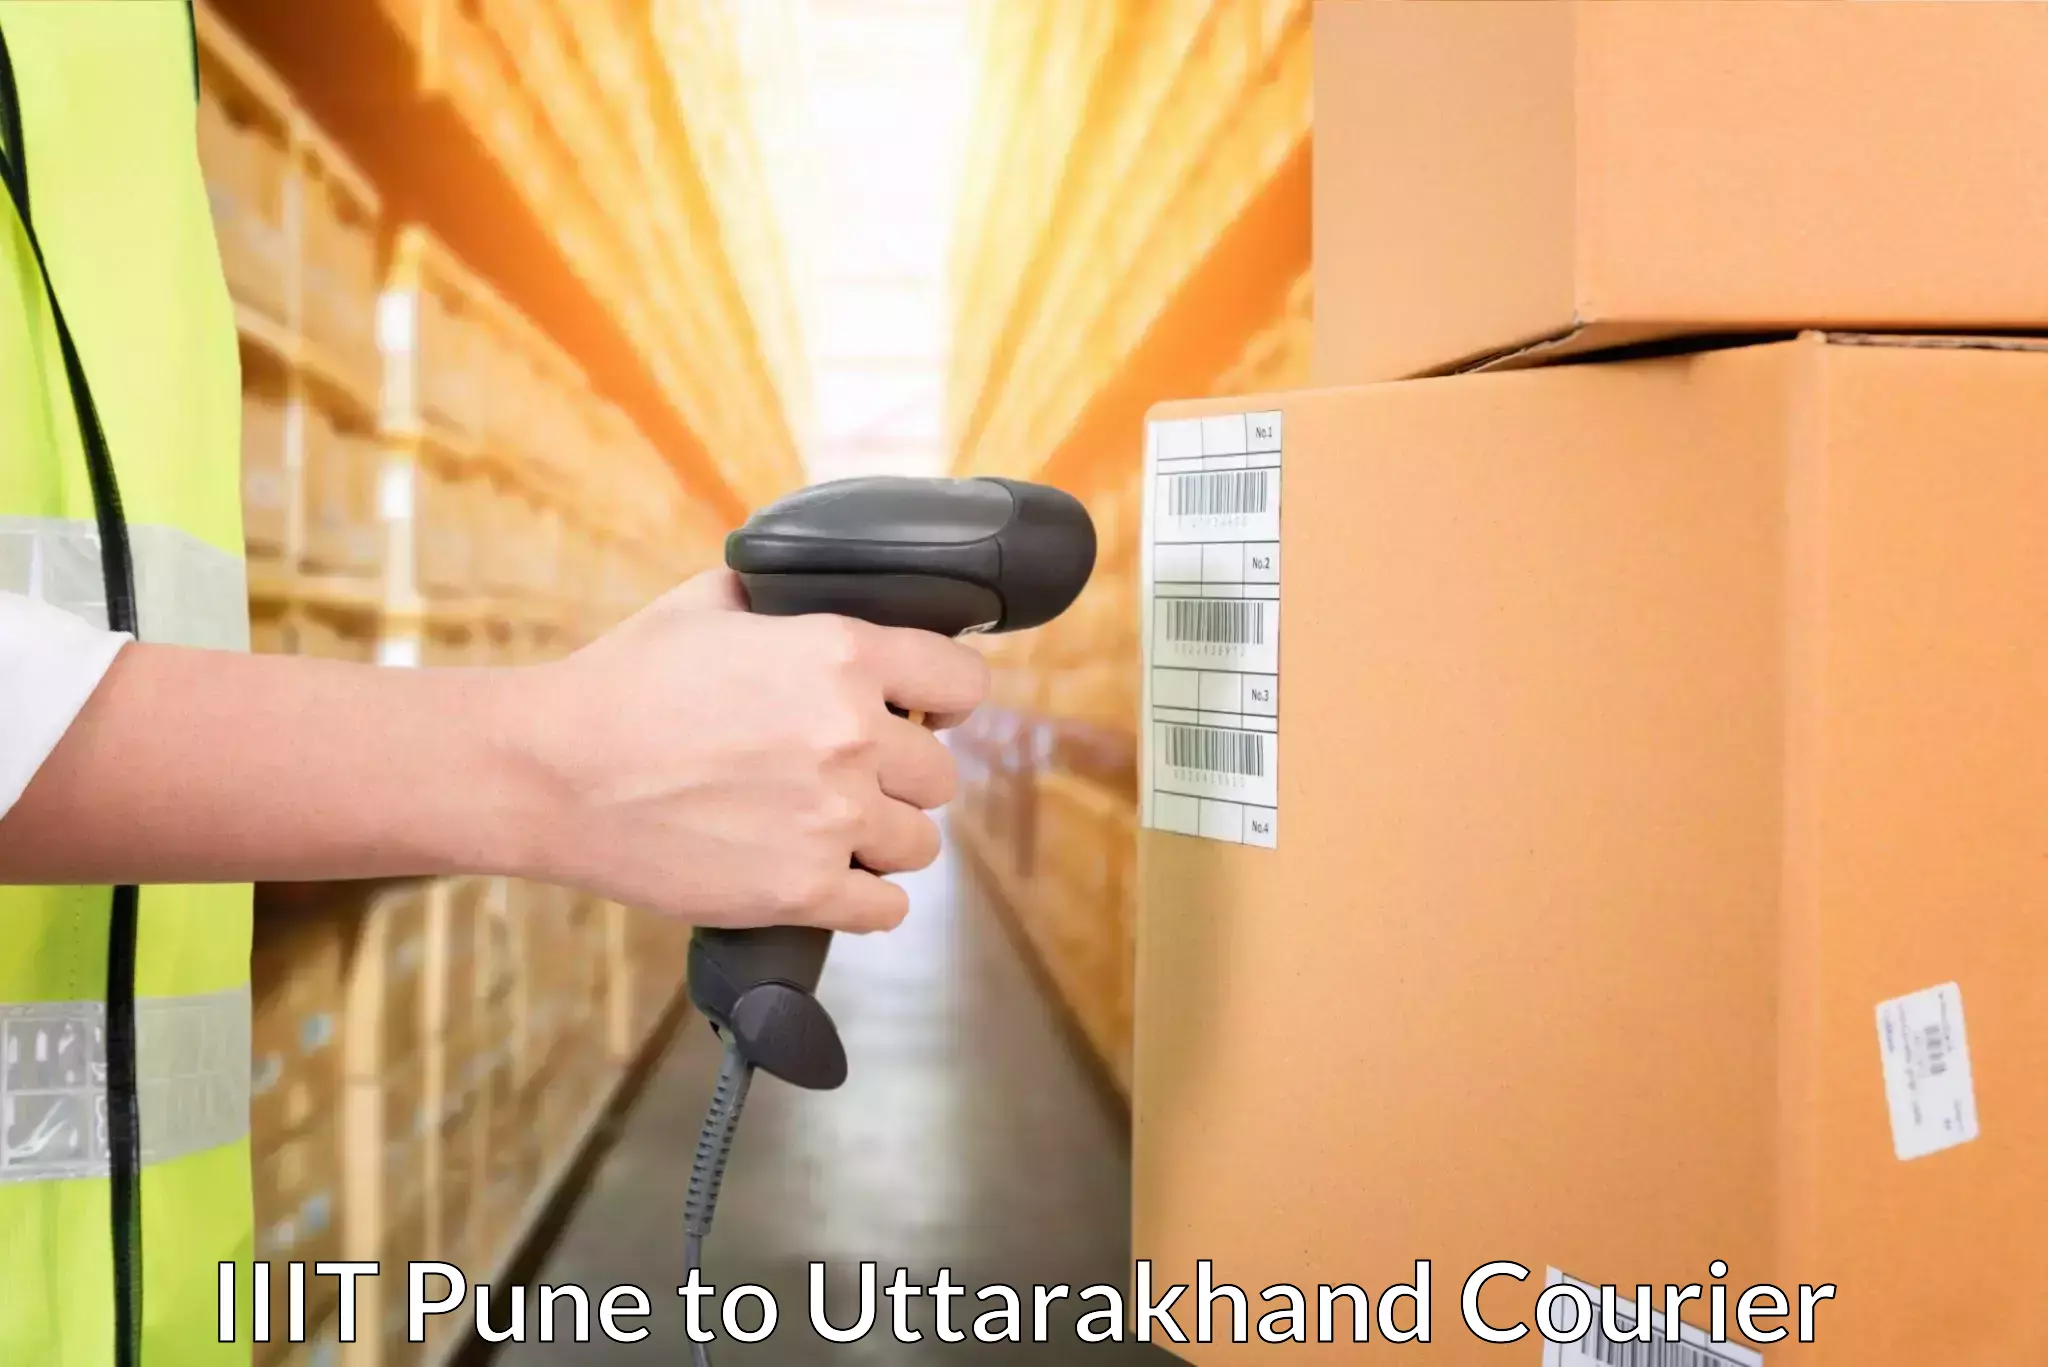 On-call courier service IIIT Pune to Dehradun